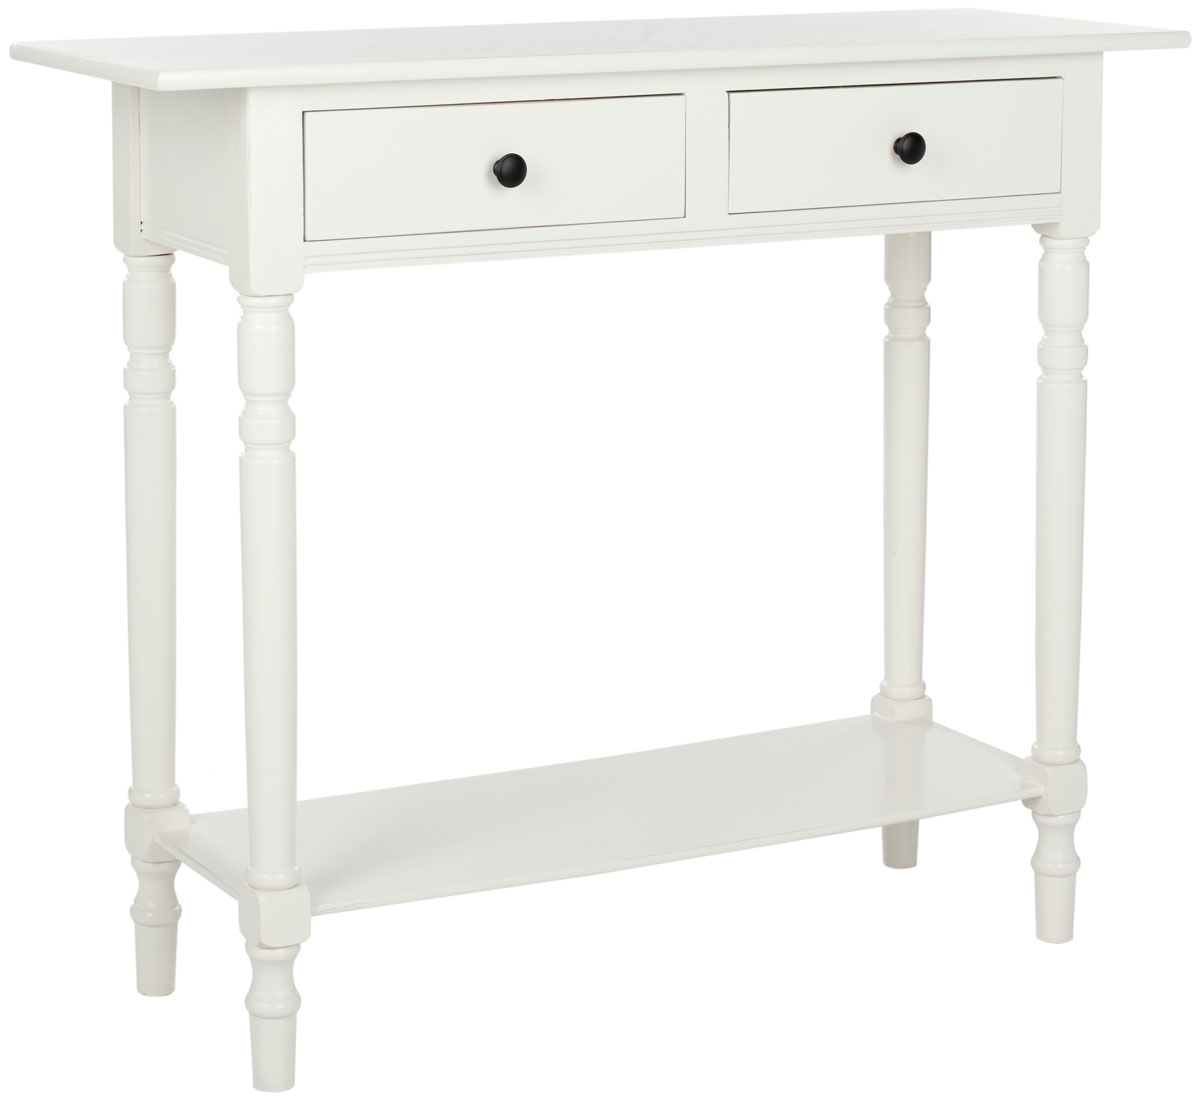 Rosemary 2 Drawer Console - Distressed Cream - Arlo Home - Image 2